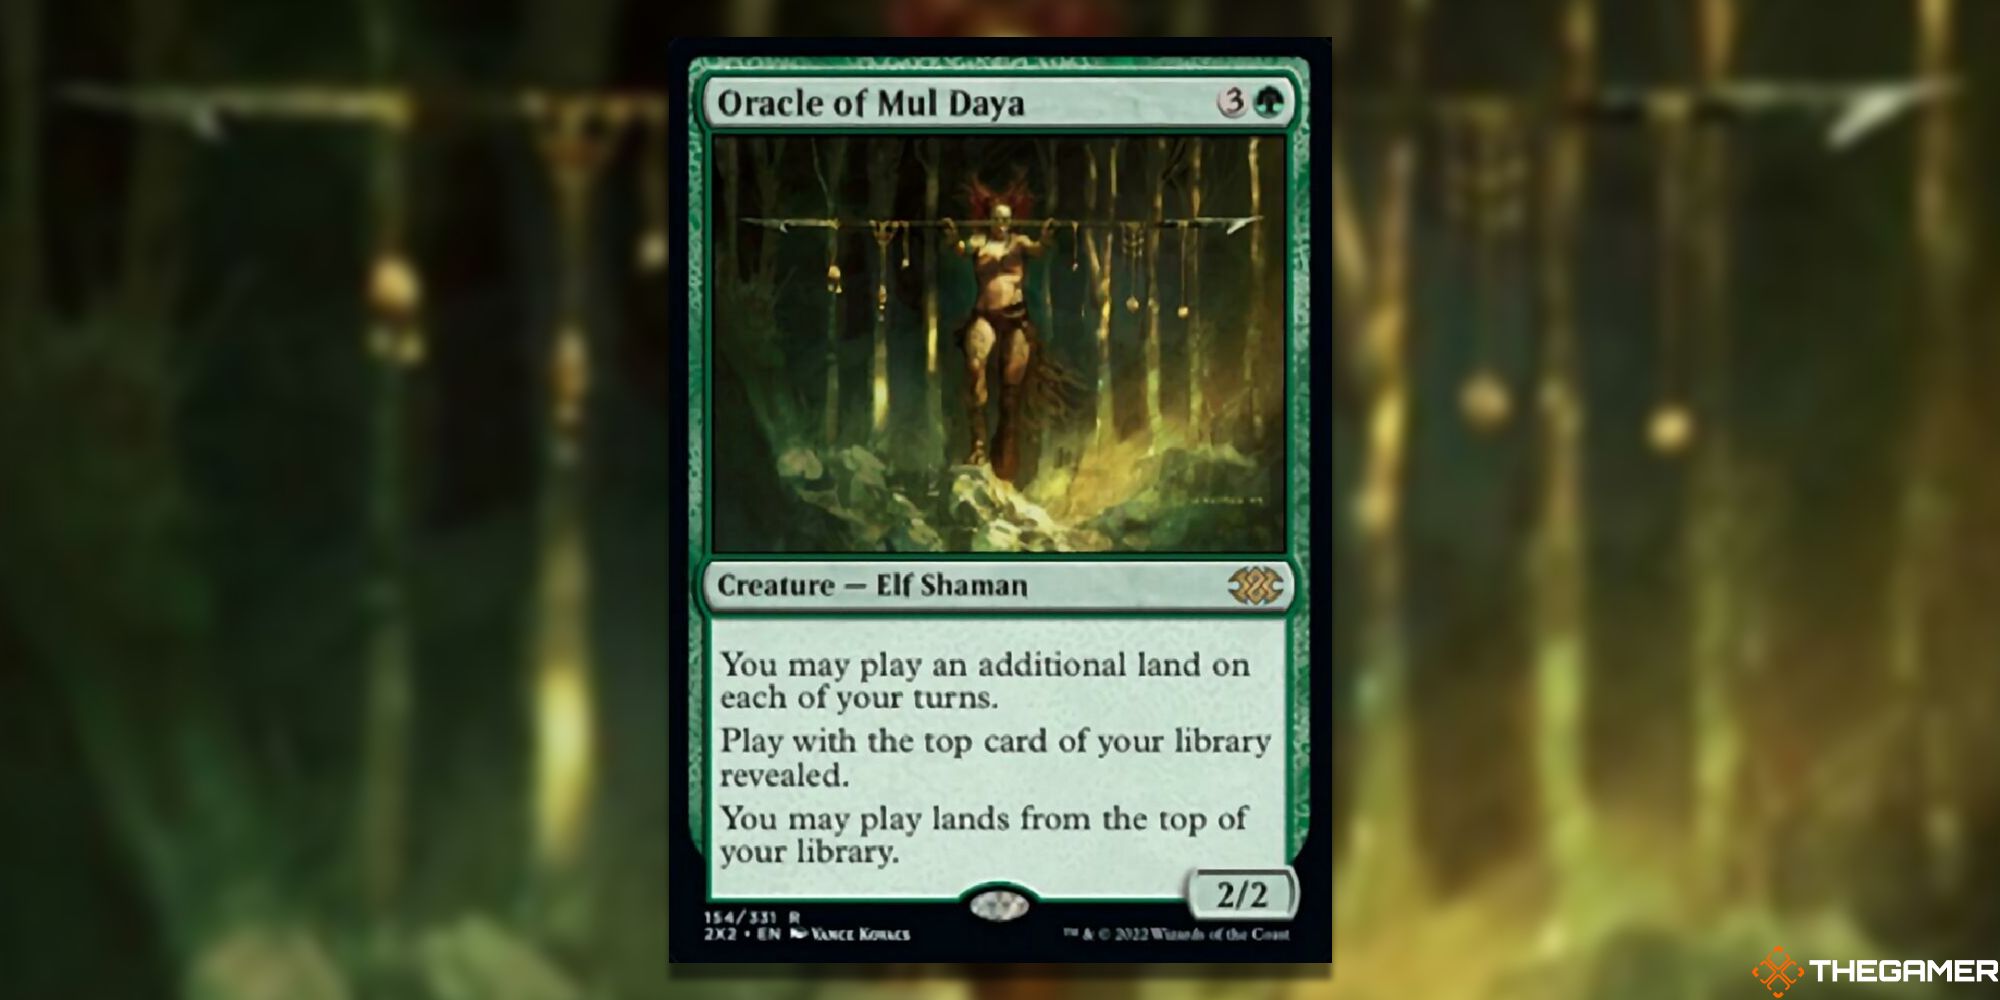 Magic: The Gathering Oracle of Mul Daya full card with background